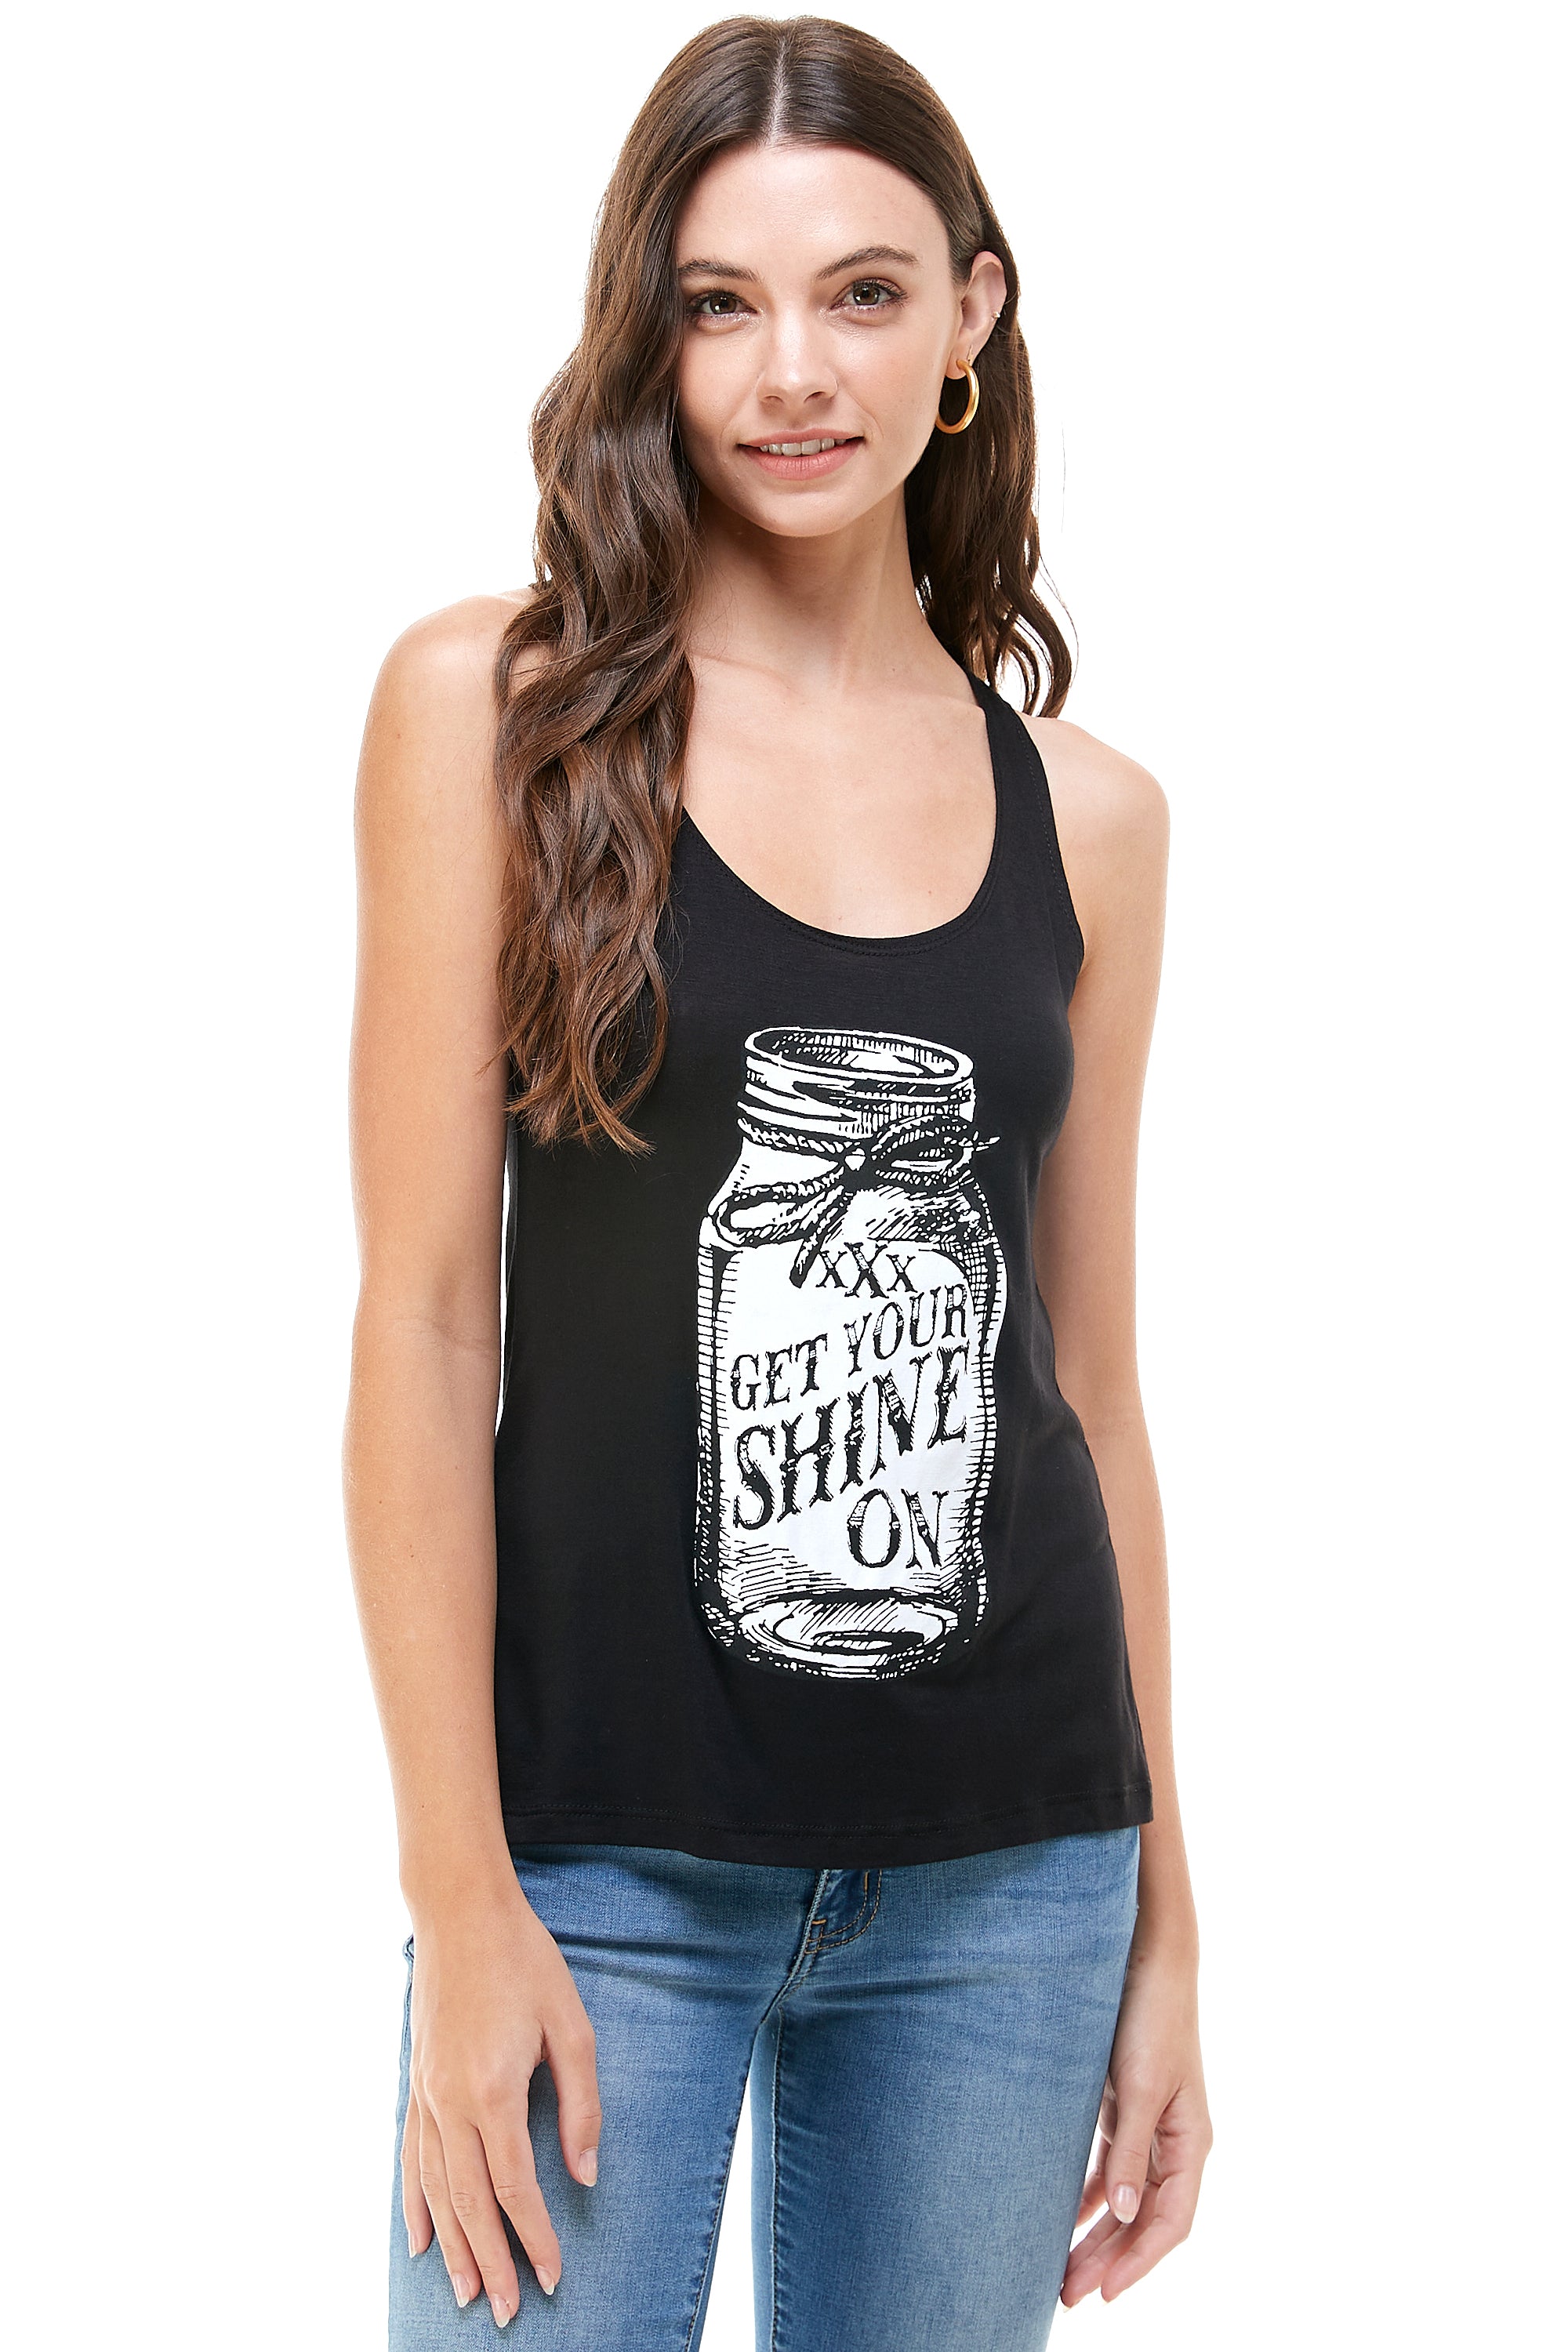 GET YOUR SHINE ON TANK TOP – Trailsclothing.com